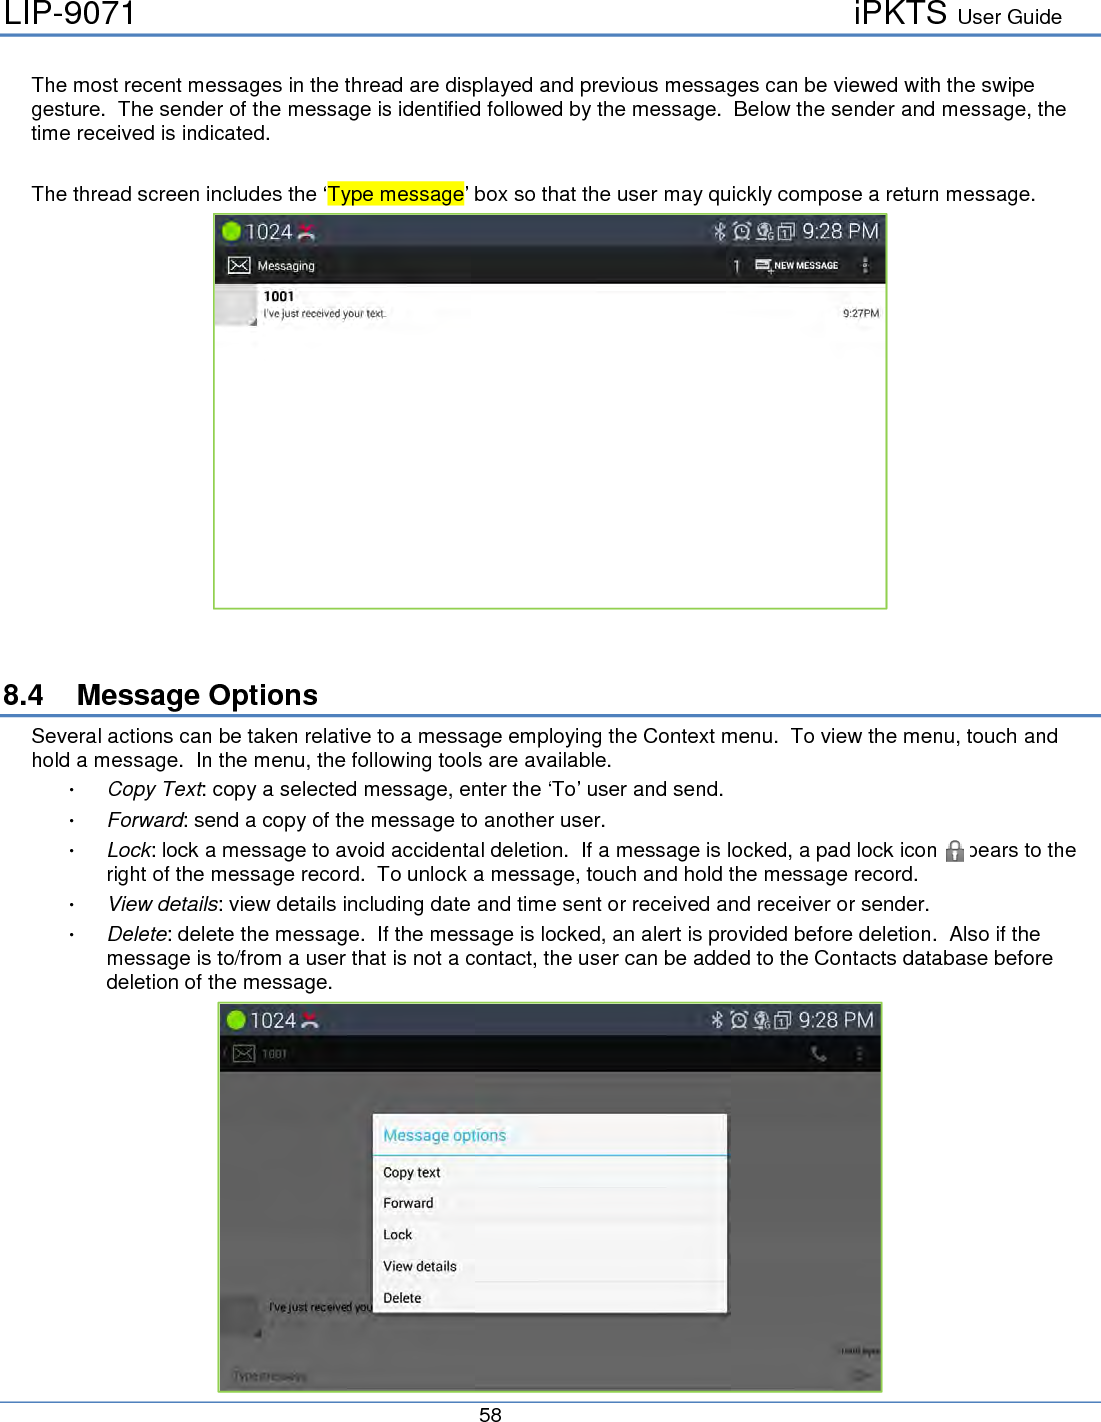 LIP-9071     iPKTS User Guide      58   The most recent messages in the thread are displayed and previous messages can be viewed with the swipe gesture.  The sender of the message is identified followed by the message.  Below the sender and message, the time received is indicated.  The thread screen includes the ‘Type message’ box so that the user may quickly compose a return message.    8.4 Message Options Several actions can be taken relative to a message employing the Context menu.  To view the menu, touch and hold a message.  In the menu, the following tools are available.  Copy Text: copy a selected message, enter the ‘To’ user and send.  Forward: send a copy of the message to another user.  Lock: lock a message to avoid accidental deletion.  If a message is locked, a pad lock icon appears to the right of the message record.  To unlock a message, touch and hold the message record.  View details: view details including date and time sent or received and receiver or sender.  Delete: delete the message.  If the message is locked, an alert is provided before deletion.  Also if the message is to/from a user that is not a contact, the user can be added to the Contacts database before deletion of the message.  